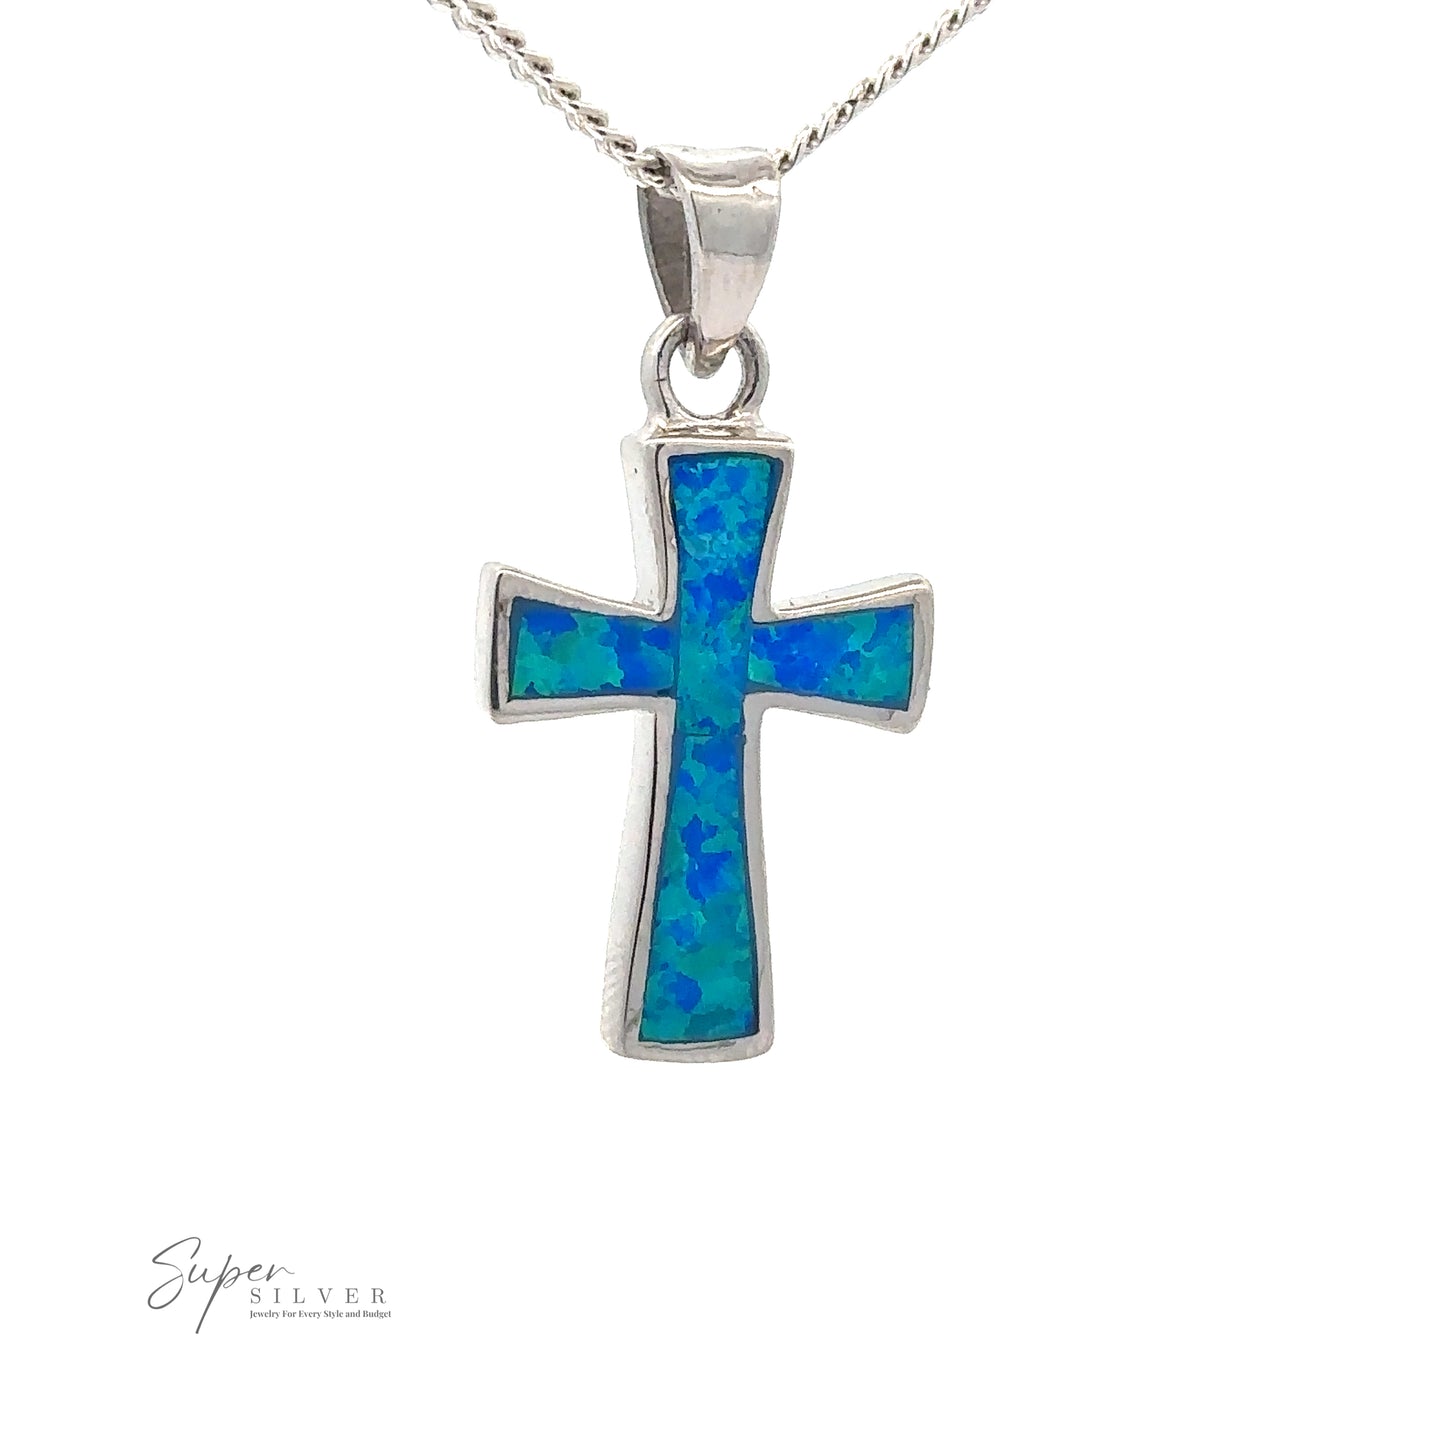 An Opal Cross Pendant, hanging on a gleaming rhodium finish silver chain. The background is plain white.